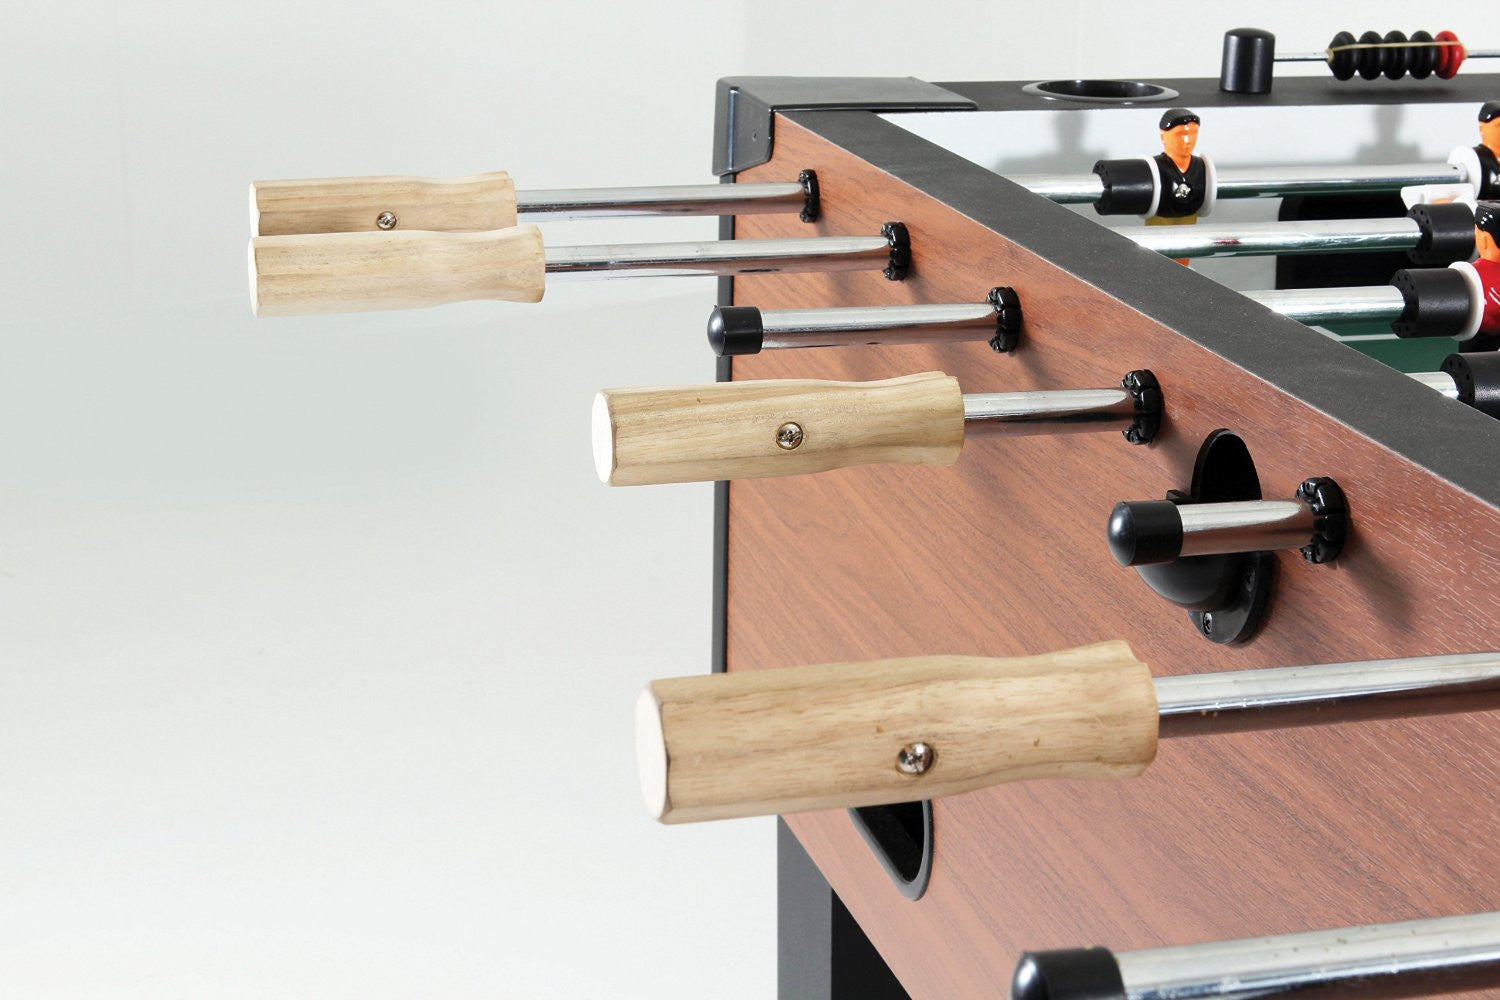 Handles of Gladiator Foosball Table from Atomic by DMI Sports available at Foosball Planet.